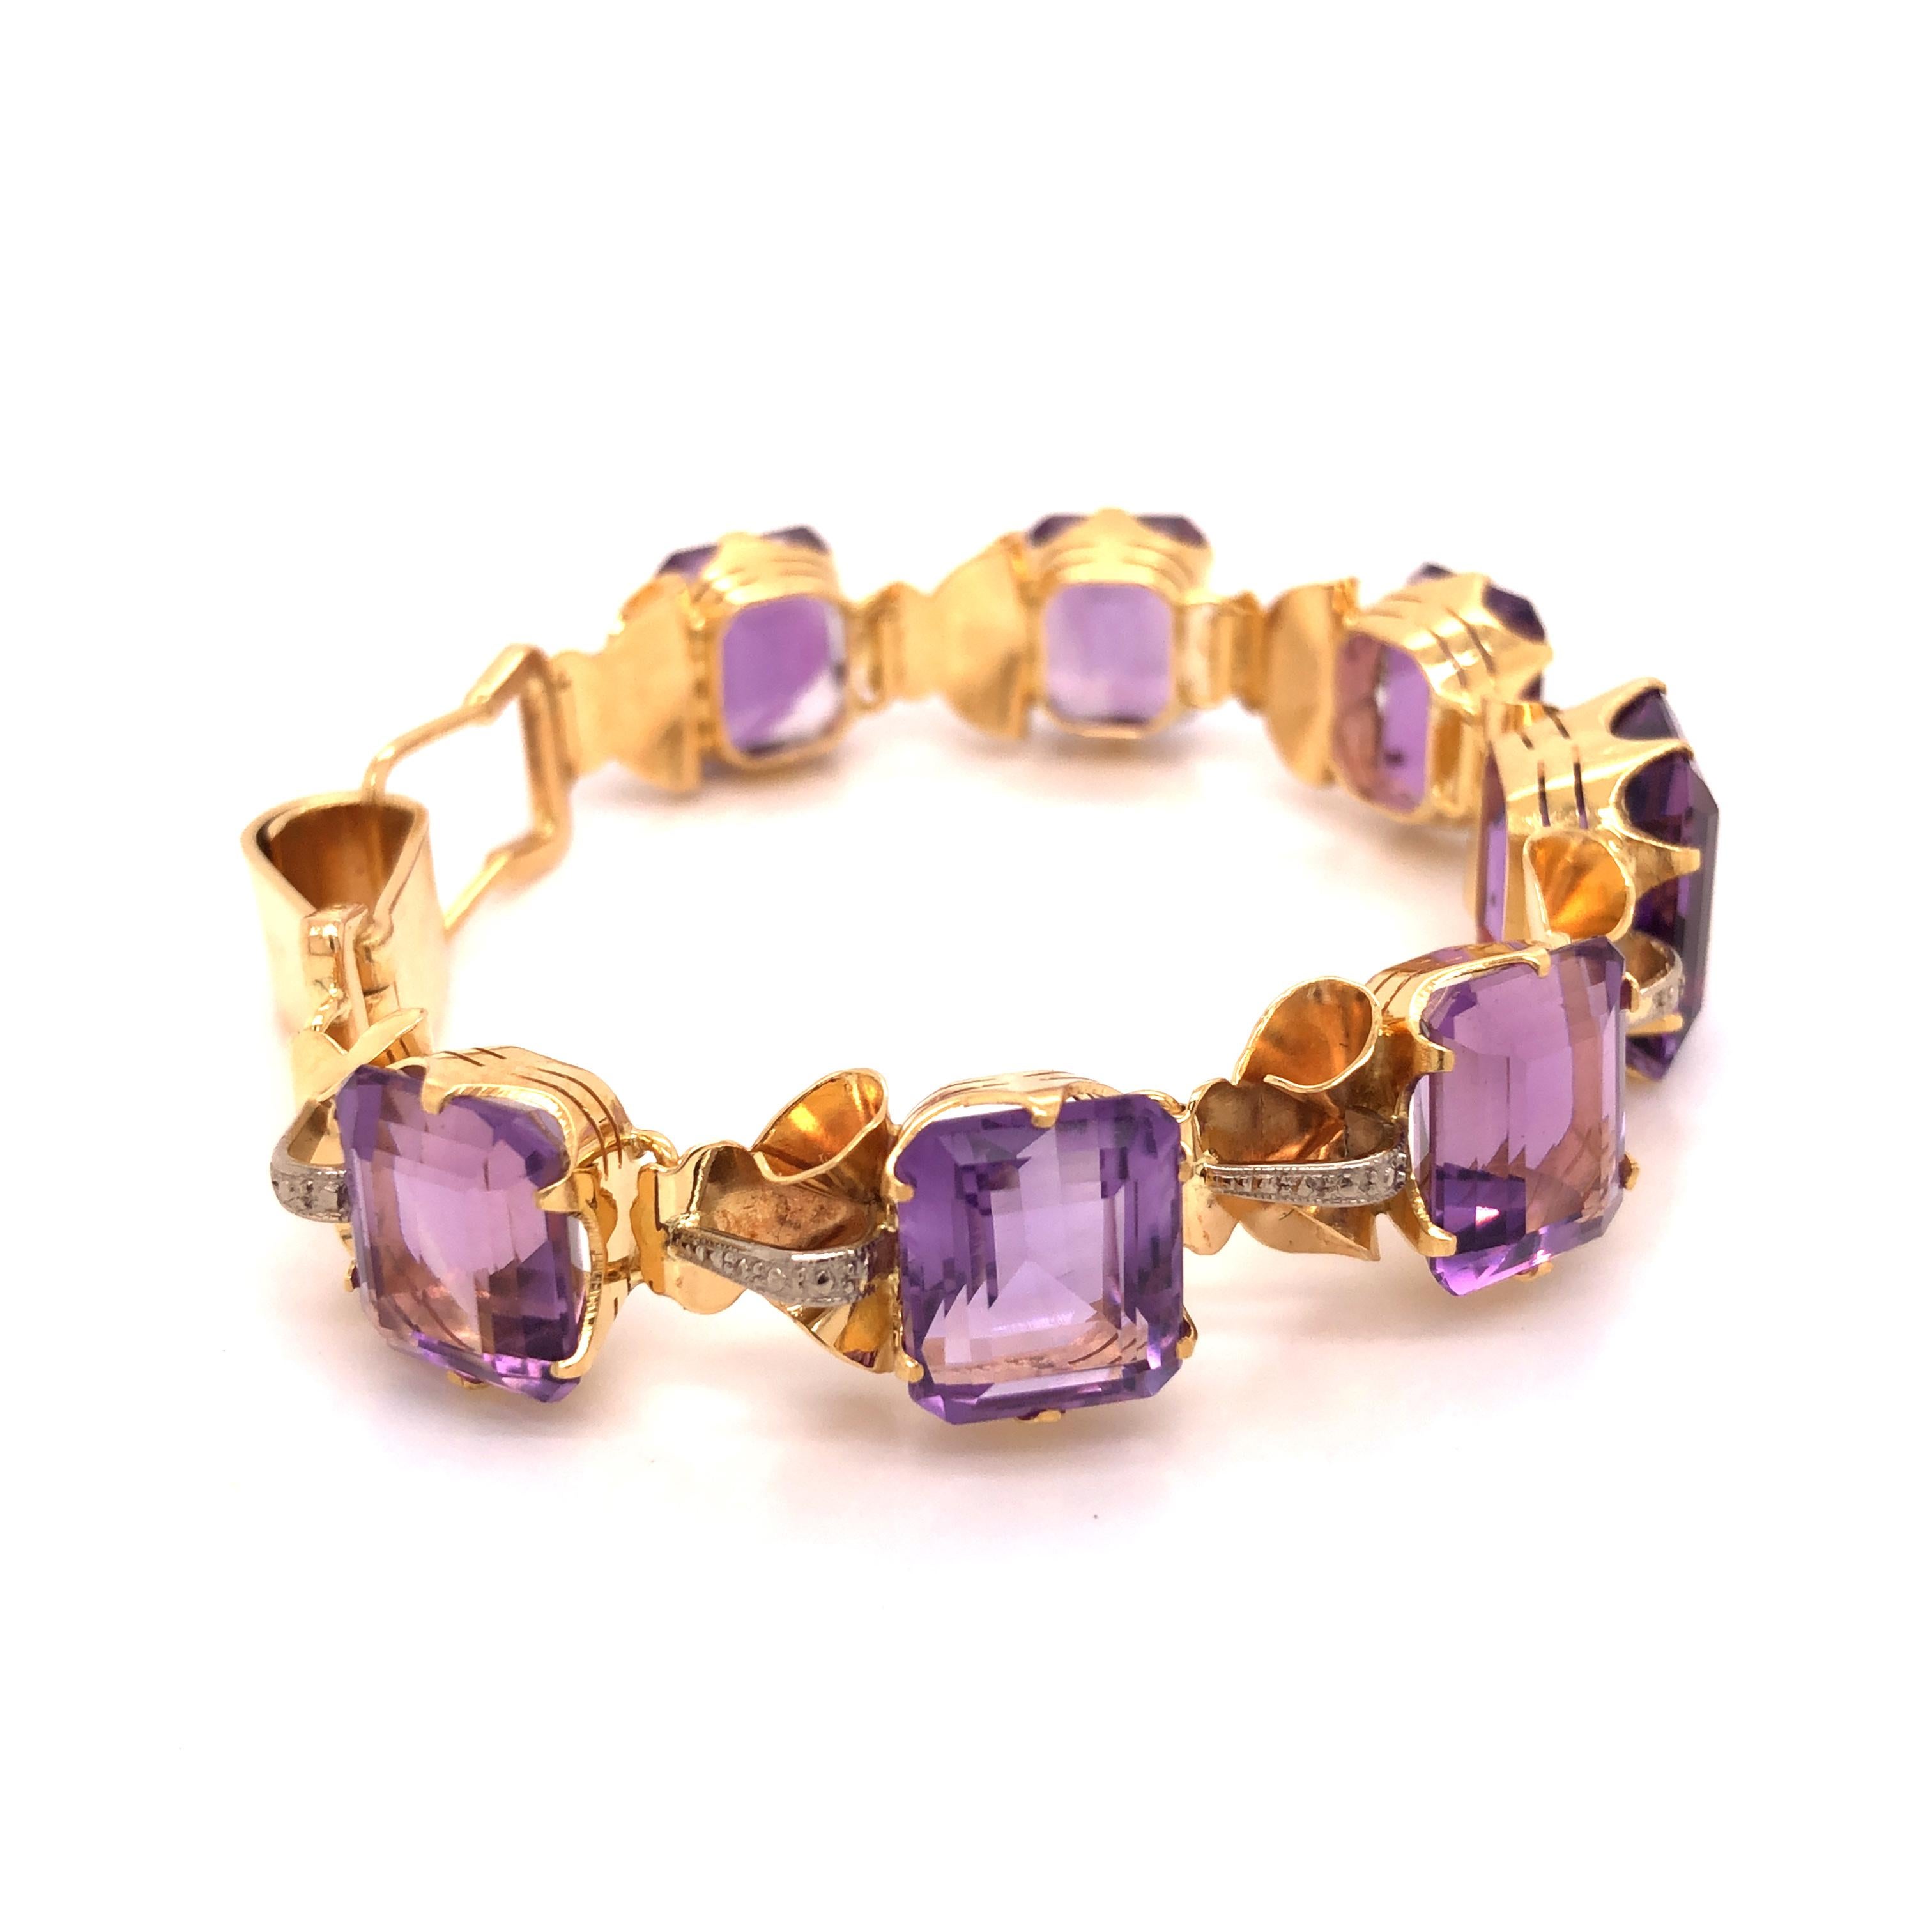 This gorgeous vintage bracelet contains 7 amethyst stones set in 18K yellow gold. The center amethyst measures 12.30 mm x 15.10 x 9.45.

Weight: 32.9 grams
